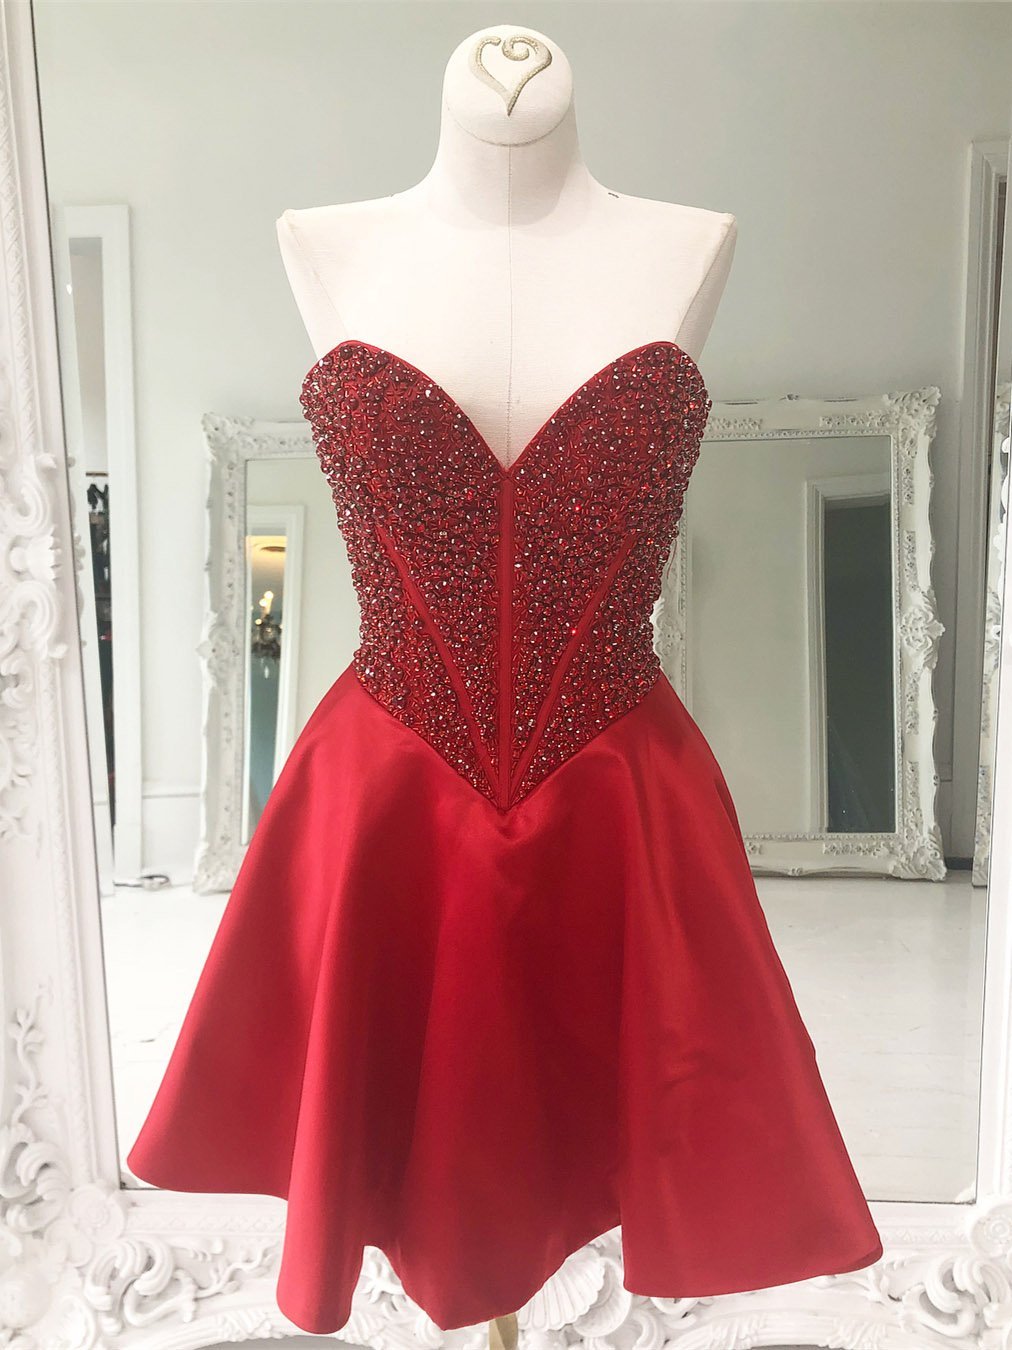 Red Homecoming Dress, Short Prom Dress ,Winter Formal Dress, Pageant Dance Dresses, Back To School Party Gown, PC0658